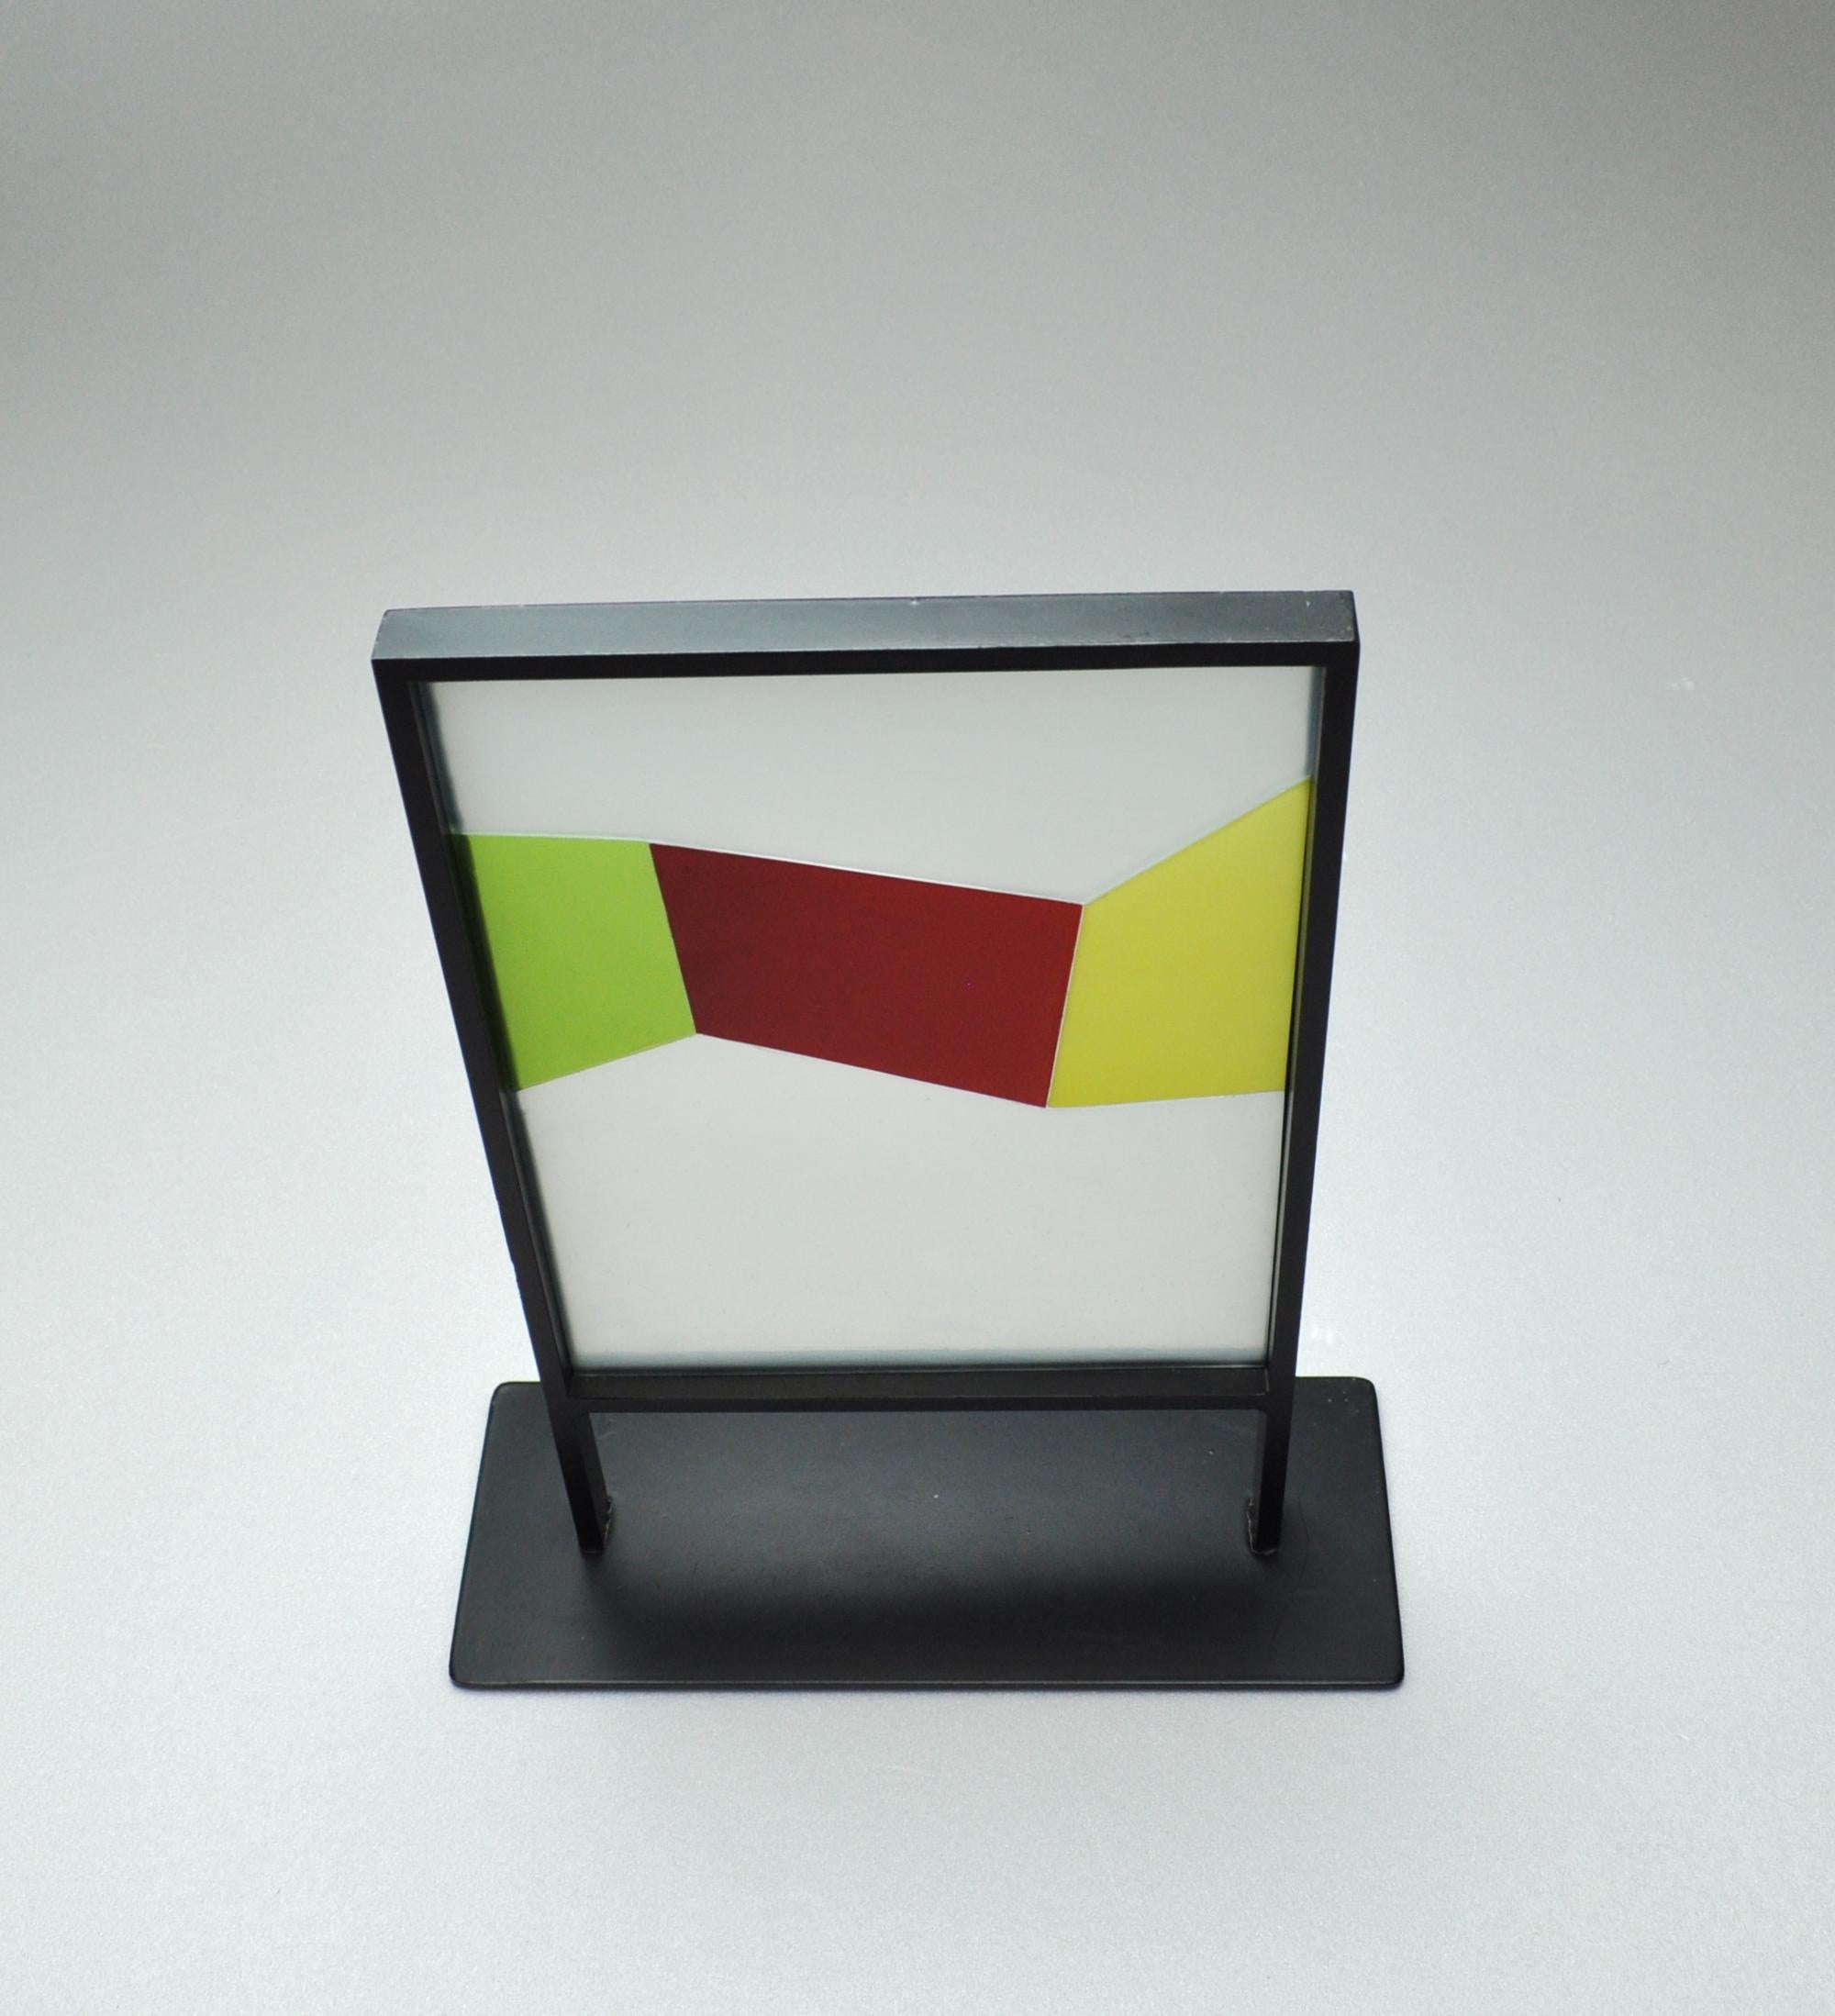 Scandinavian Stained Glass Sculpture
by the Danish artist Peter Stuhr
Art size: 38 cm H x 23 cm W x 2 D cm
Base size: 31 cm W x 12 cm D

Peter Stuhr's paintings consist of an expressive picture universe made up of streams of sieving color and